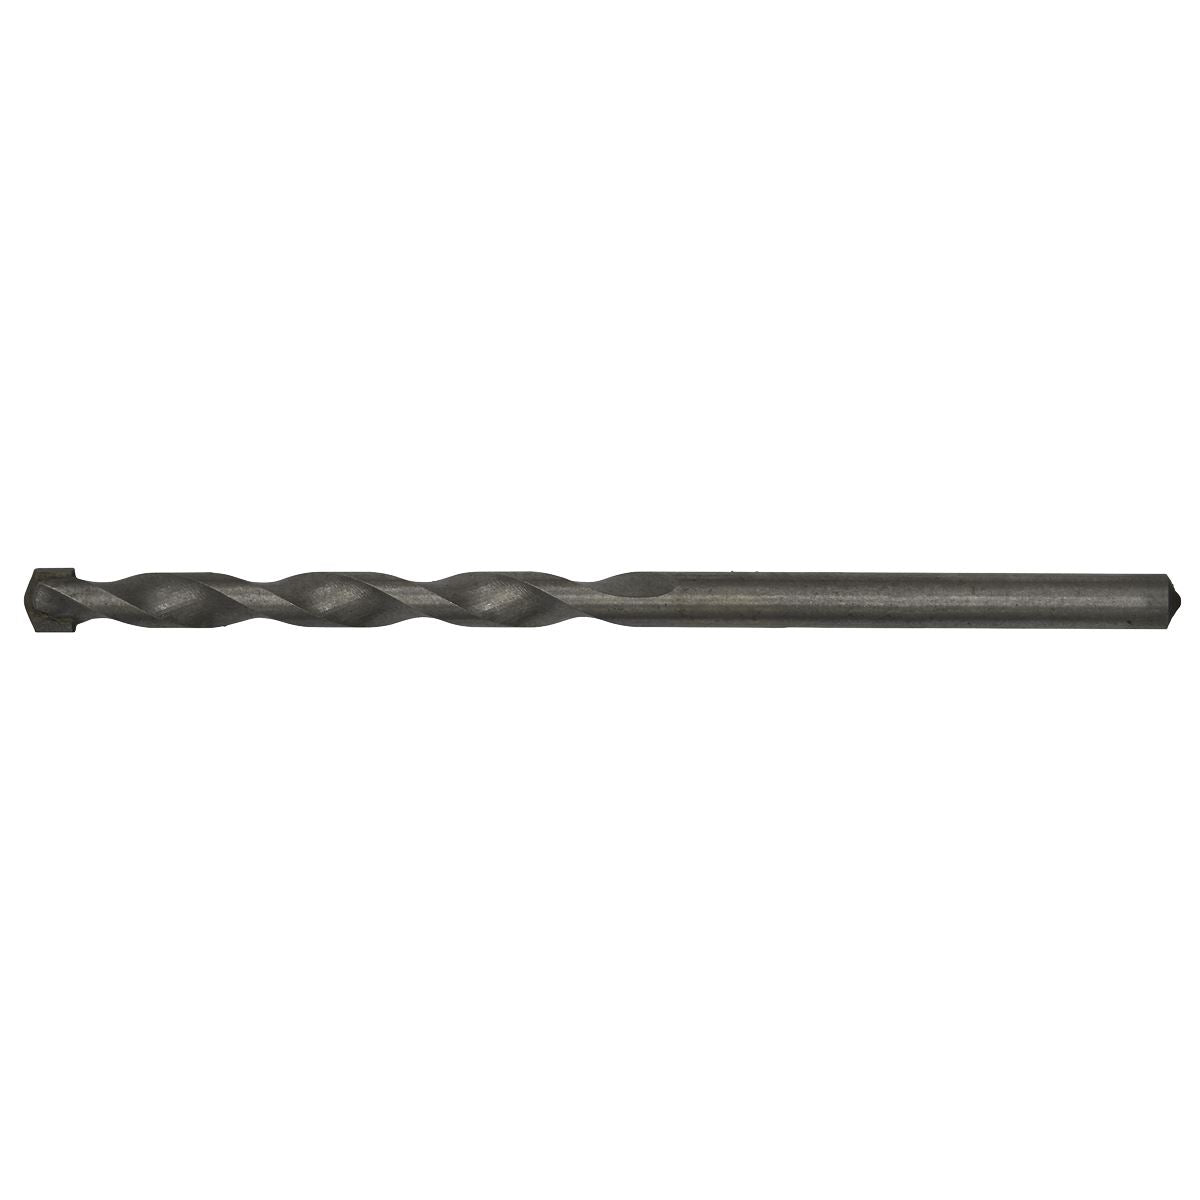 Worksafe by Sealey Straight Shank Rotary Impact Drill Bit Ø6.5 x 100mm